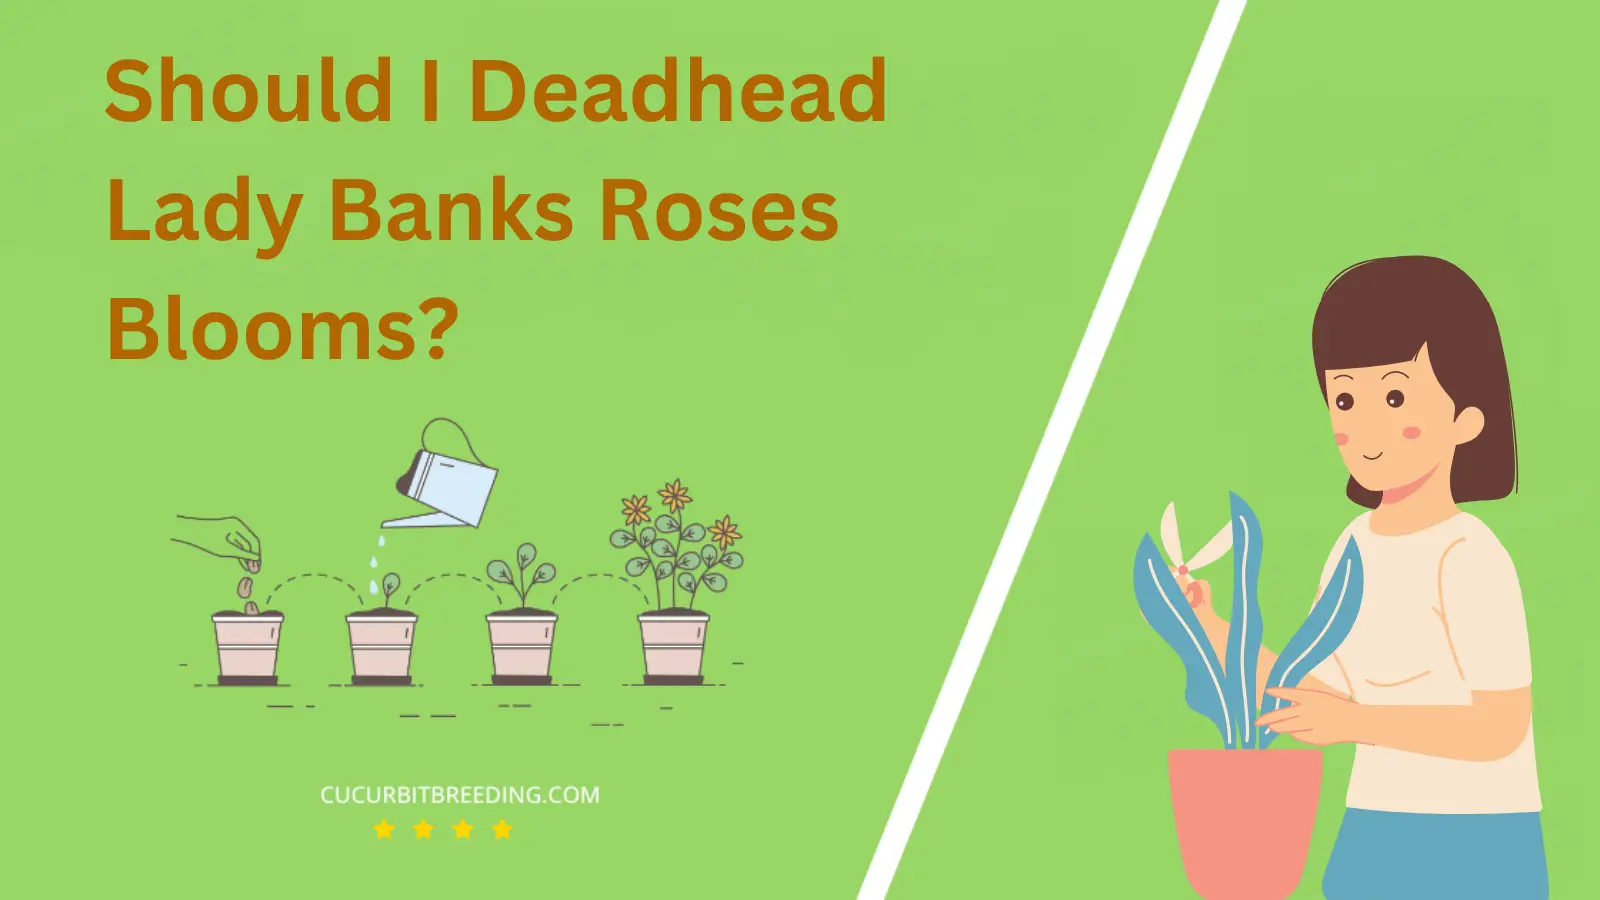 Should I Deadhead Lady Banks Roses Blooms?